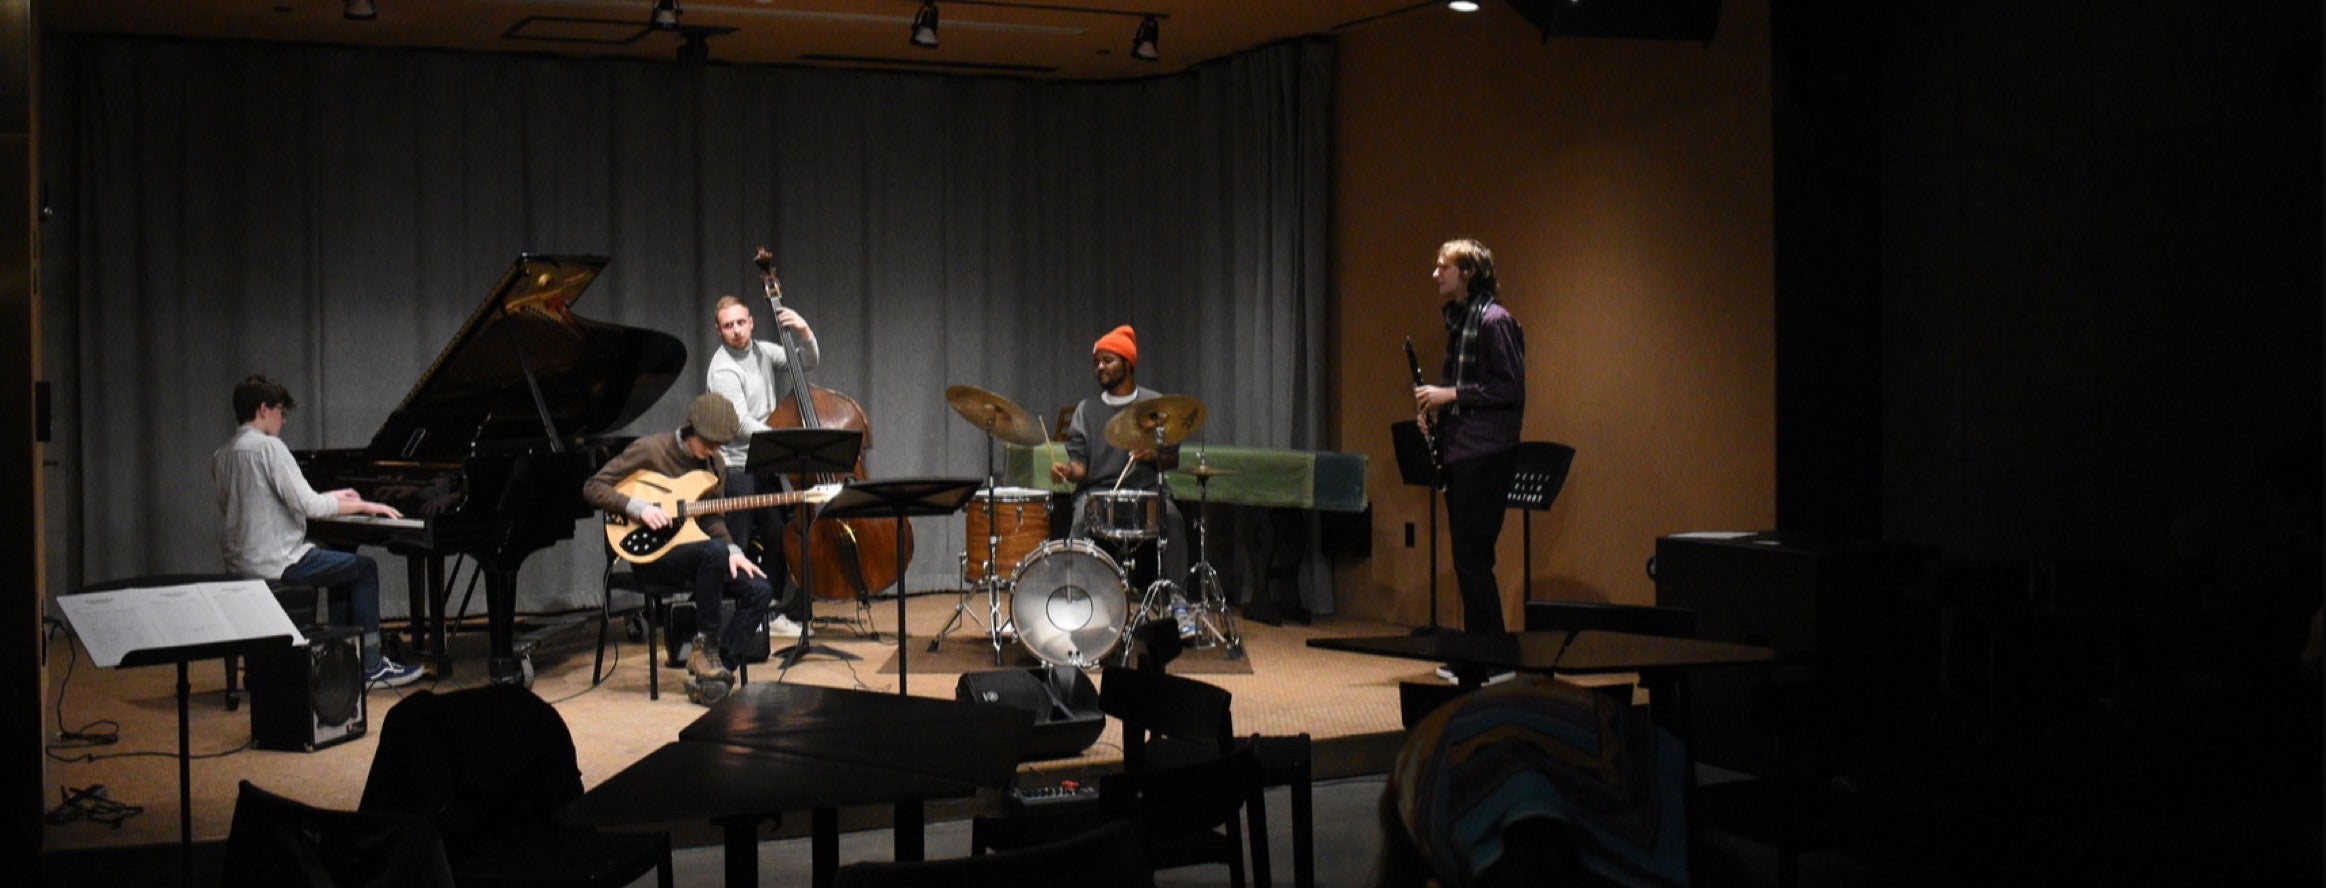 A jazz quintet performs on stage in a small venue.